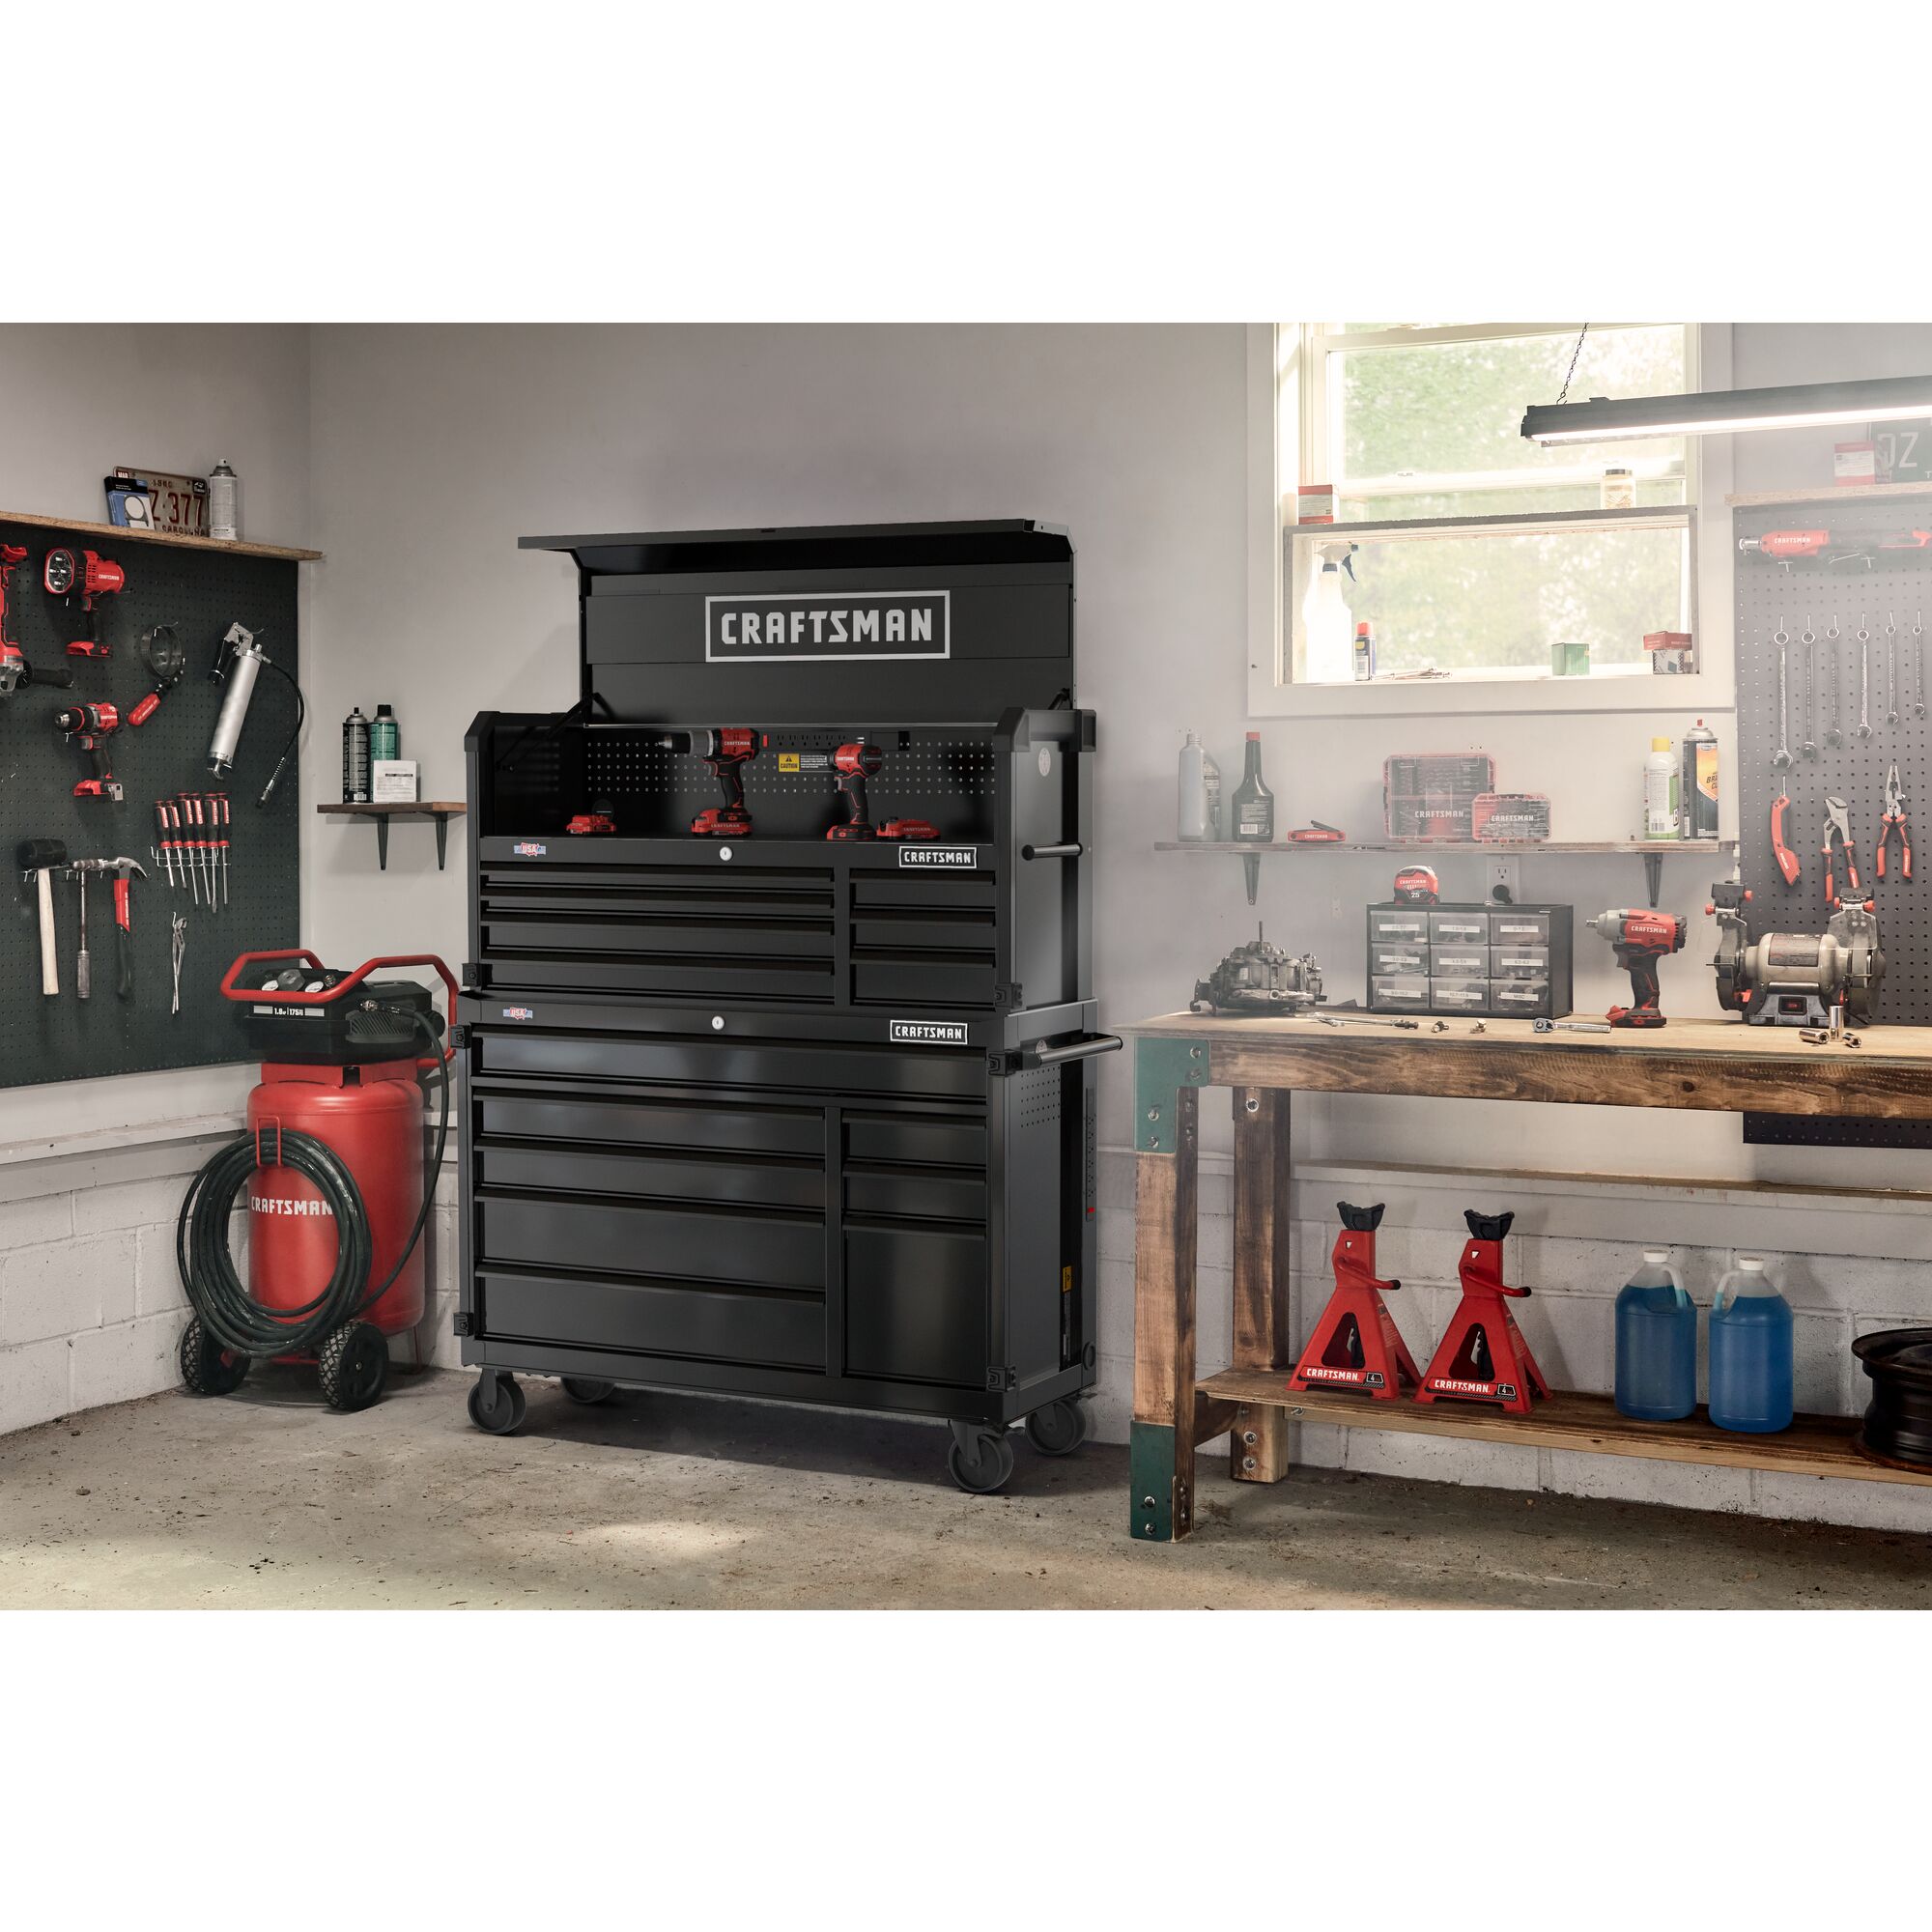 Black CRAFTSMAN Premium S2000 Series 52-inch wide Metal Tool Storage Cabinet and chest stacked on top of each other in a residential garage setting, surrounded by other CRAFTSMAN tools.